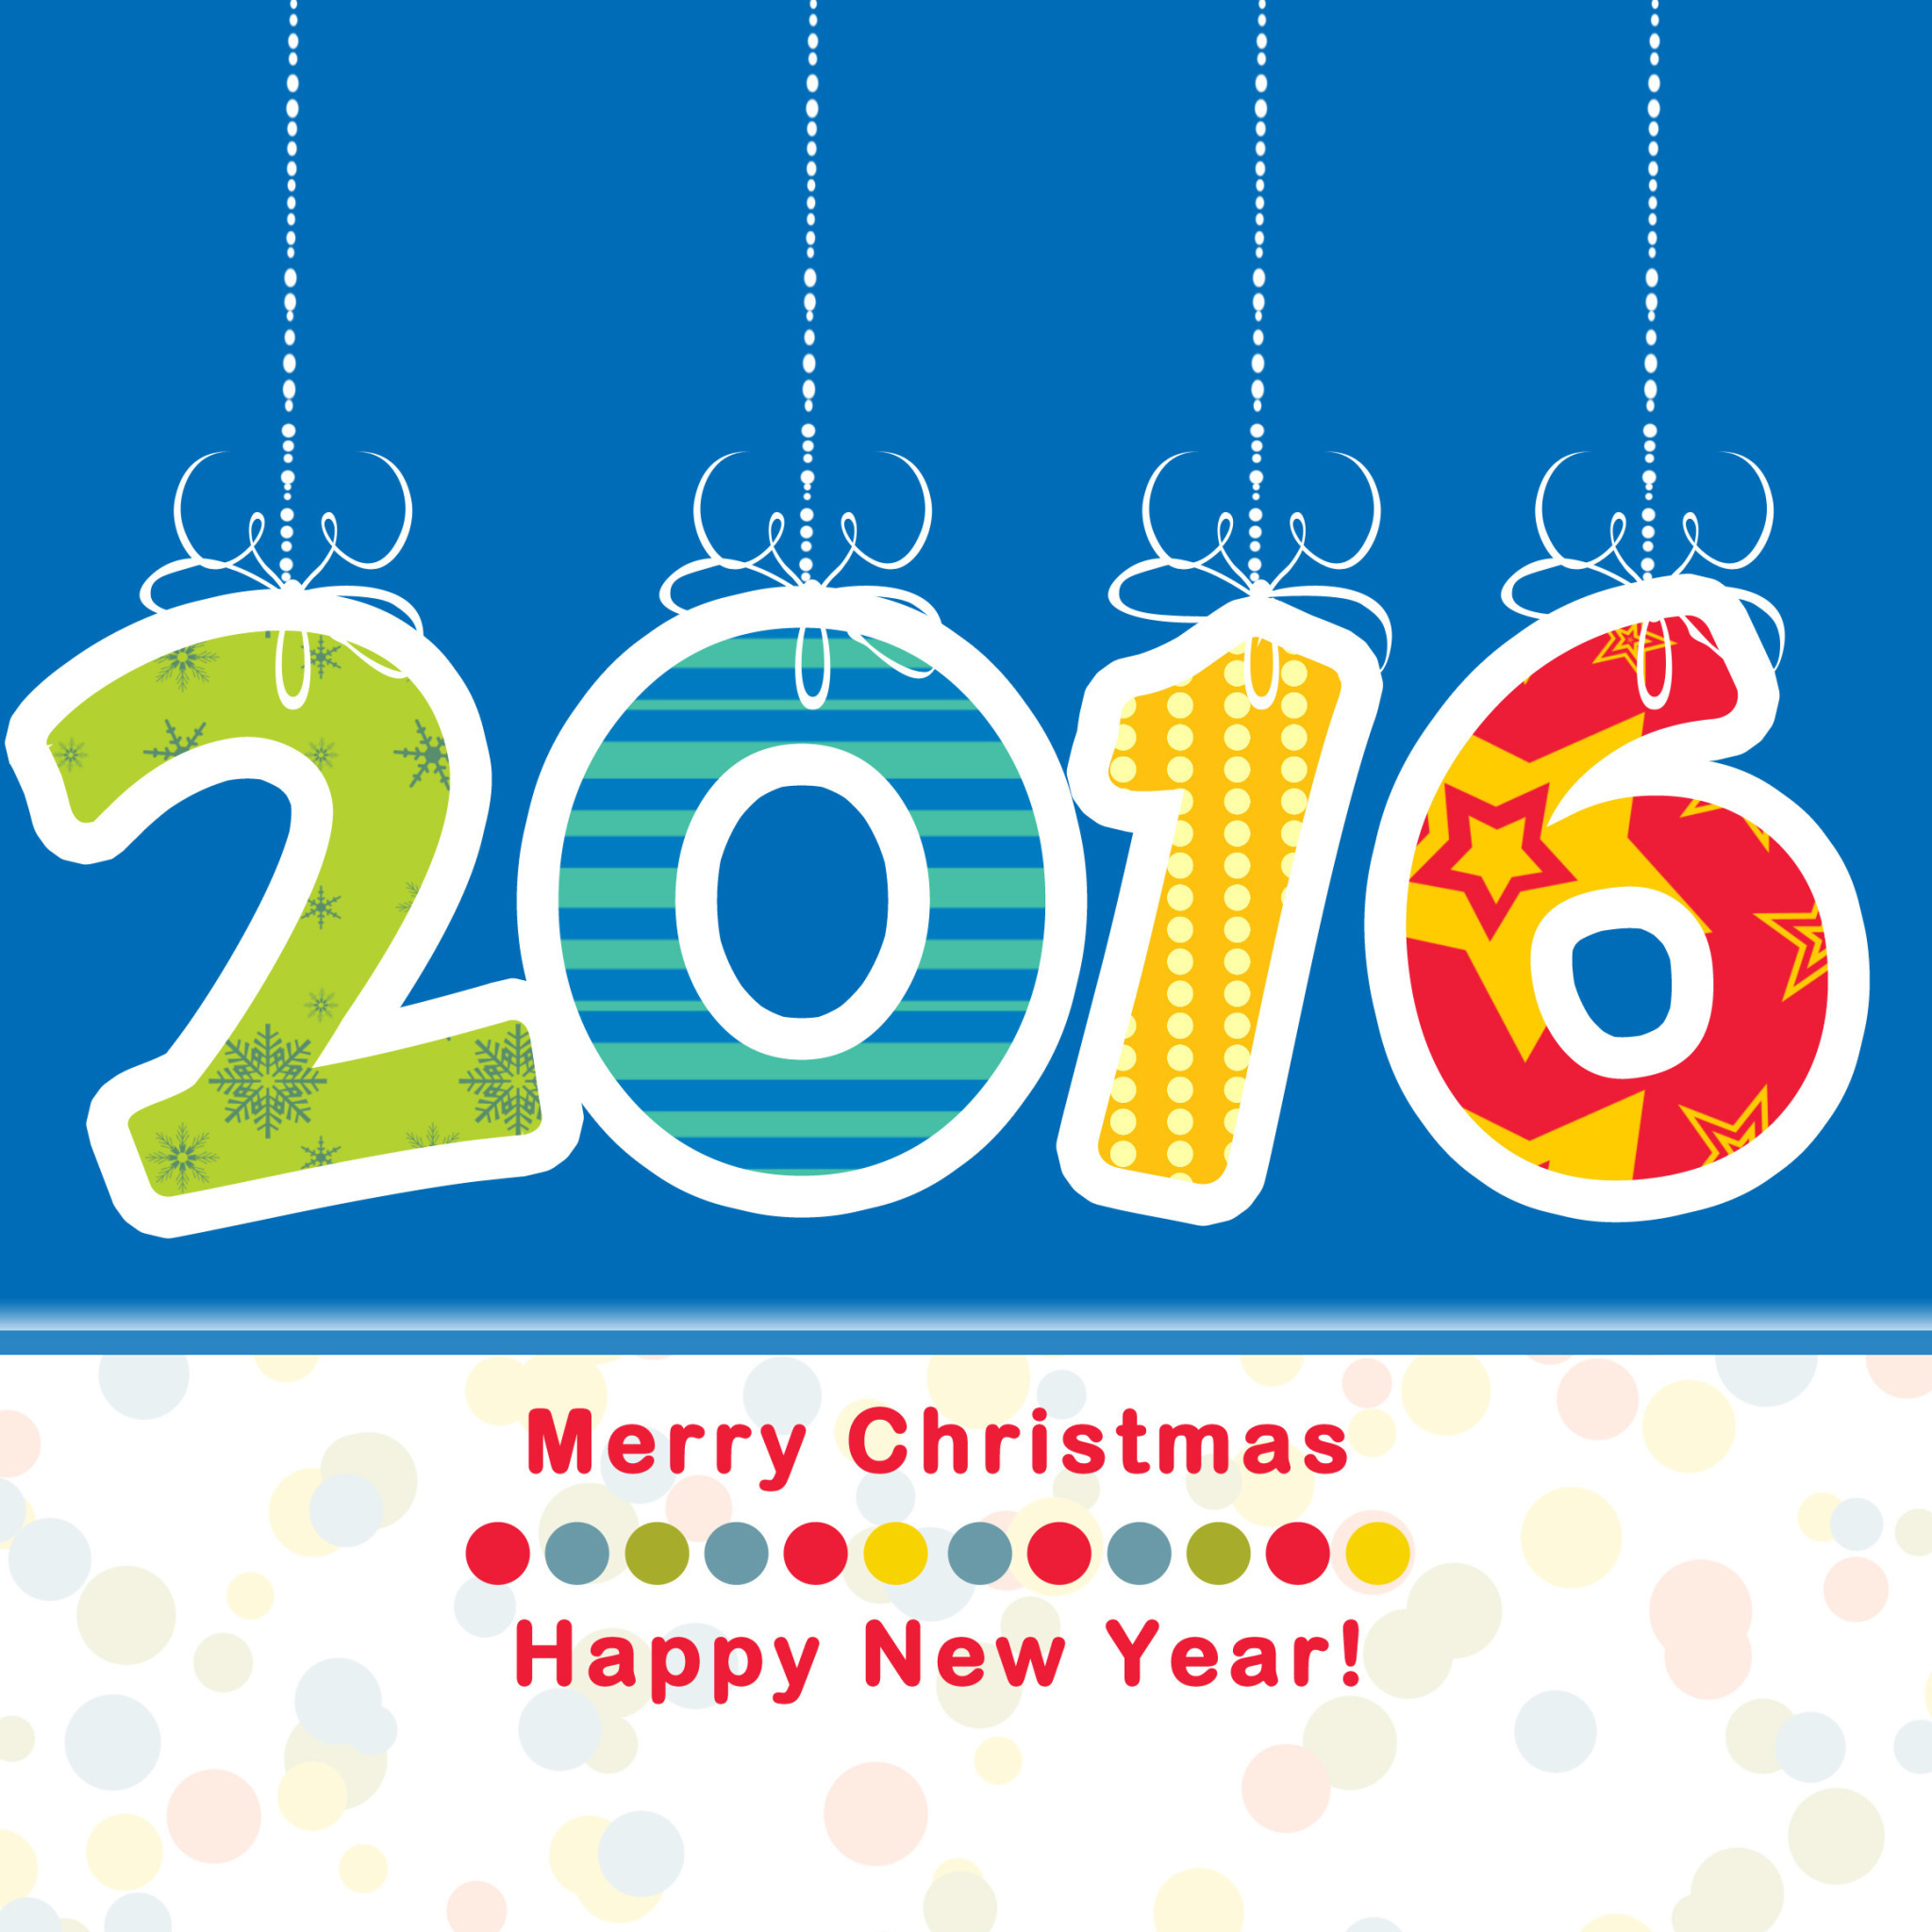 Colorful New Year 2016 Greetings wallpaper 2048x2048